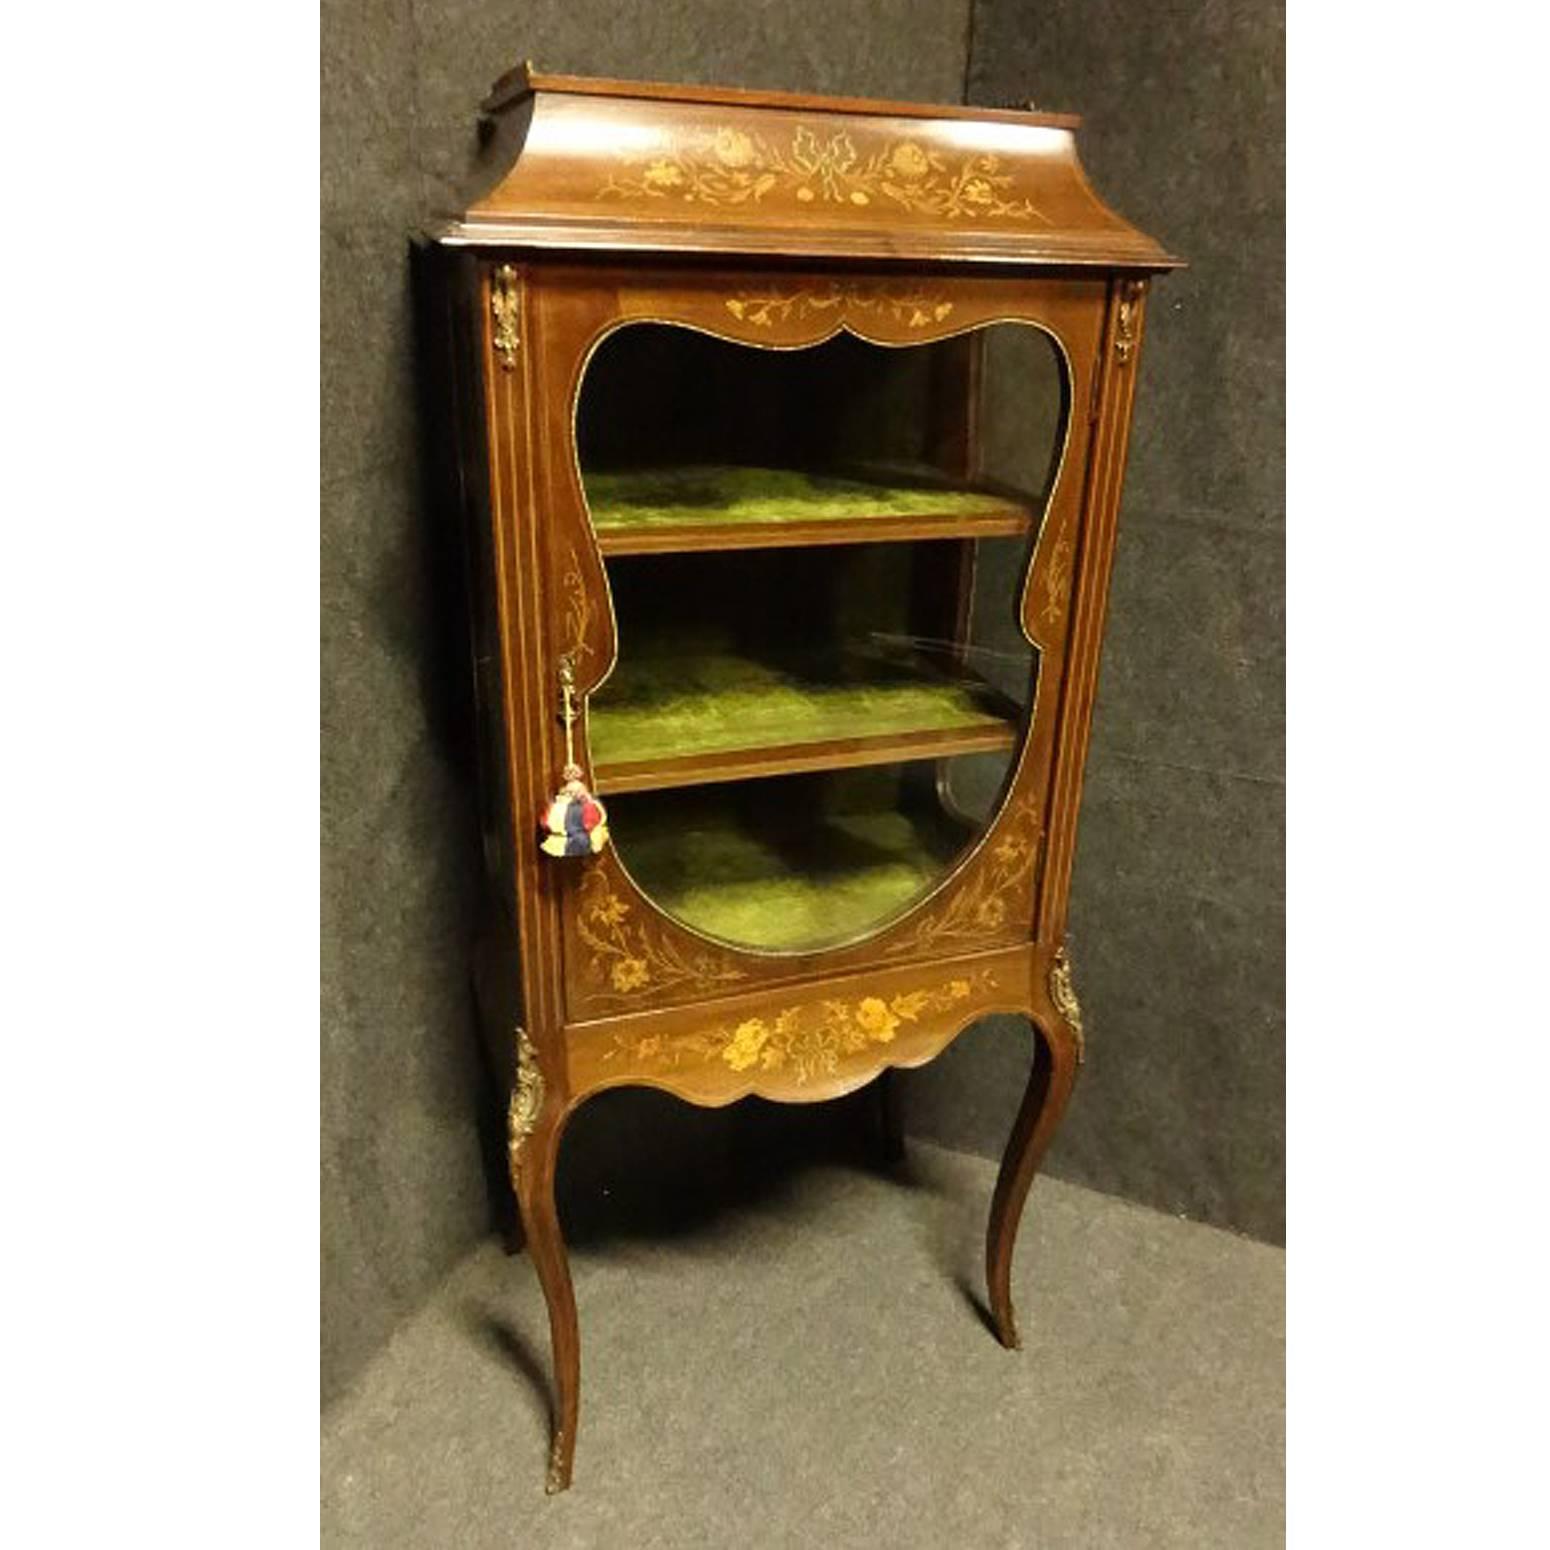 A very good Victorian mahogany display cabinet, shaped doors and sides, surrounded with brass bobble bead. Brass mounts to sides knees and toes, marquetry detailing throughout, caddy top with brass gallery, two inlaid shelves with original velvet